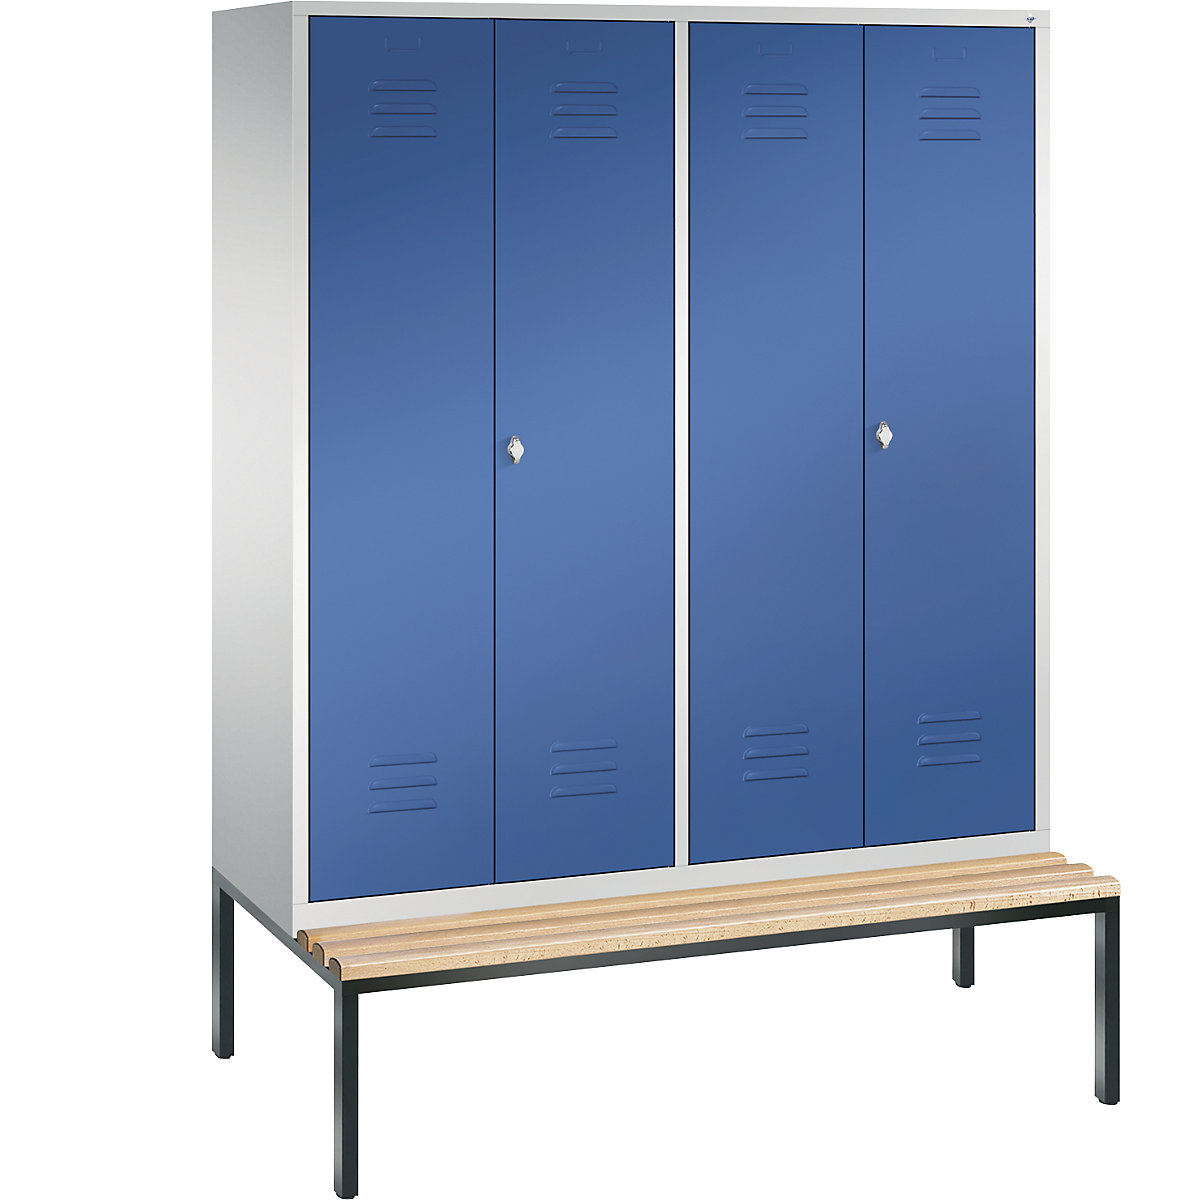 CLASSIC cloakroom locker with bench mounted underneath, doors close in the middle – C+P